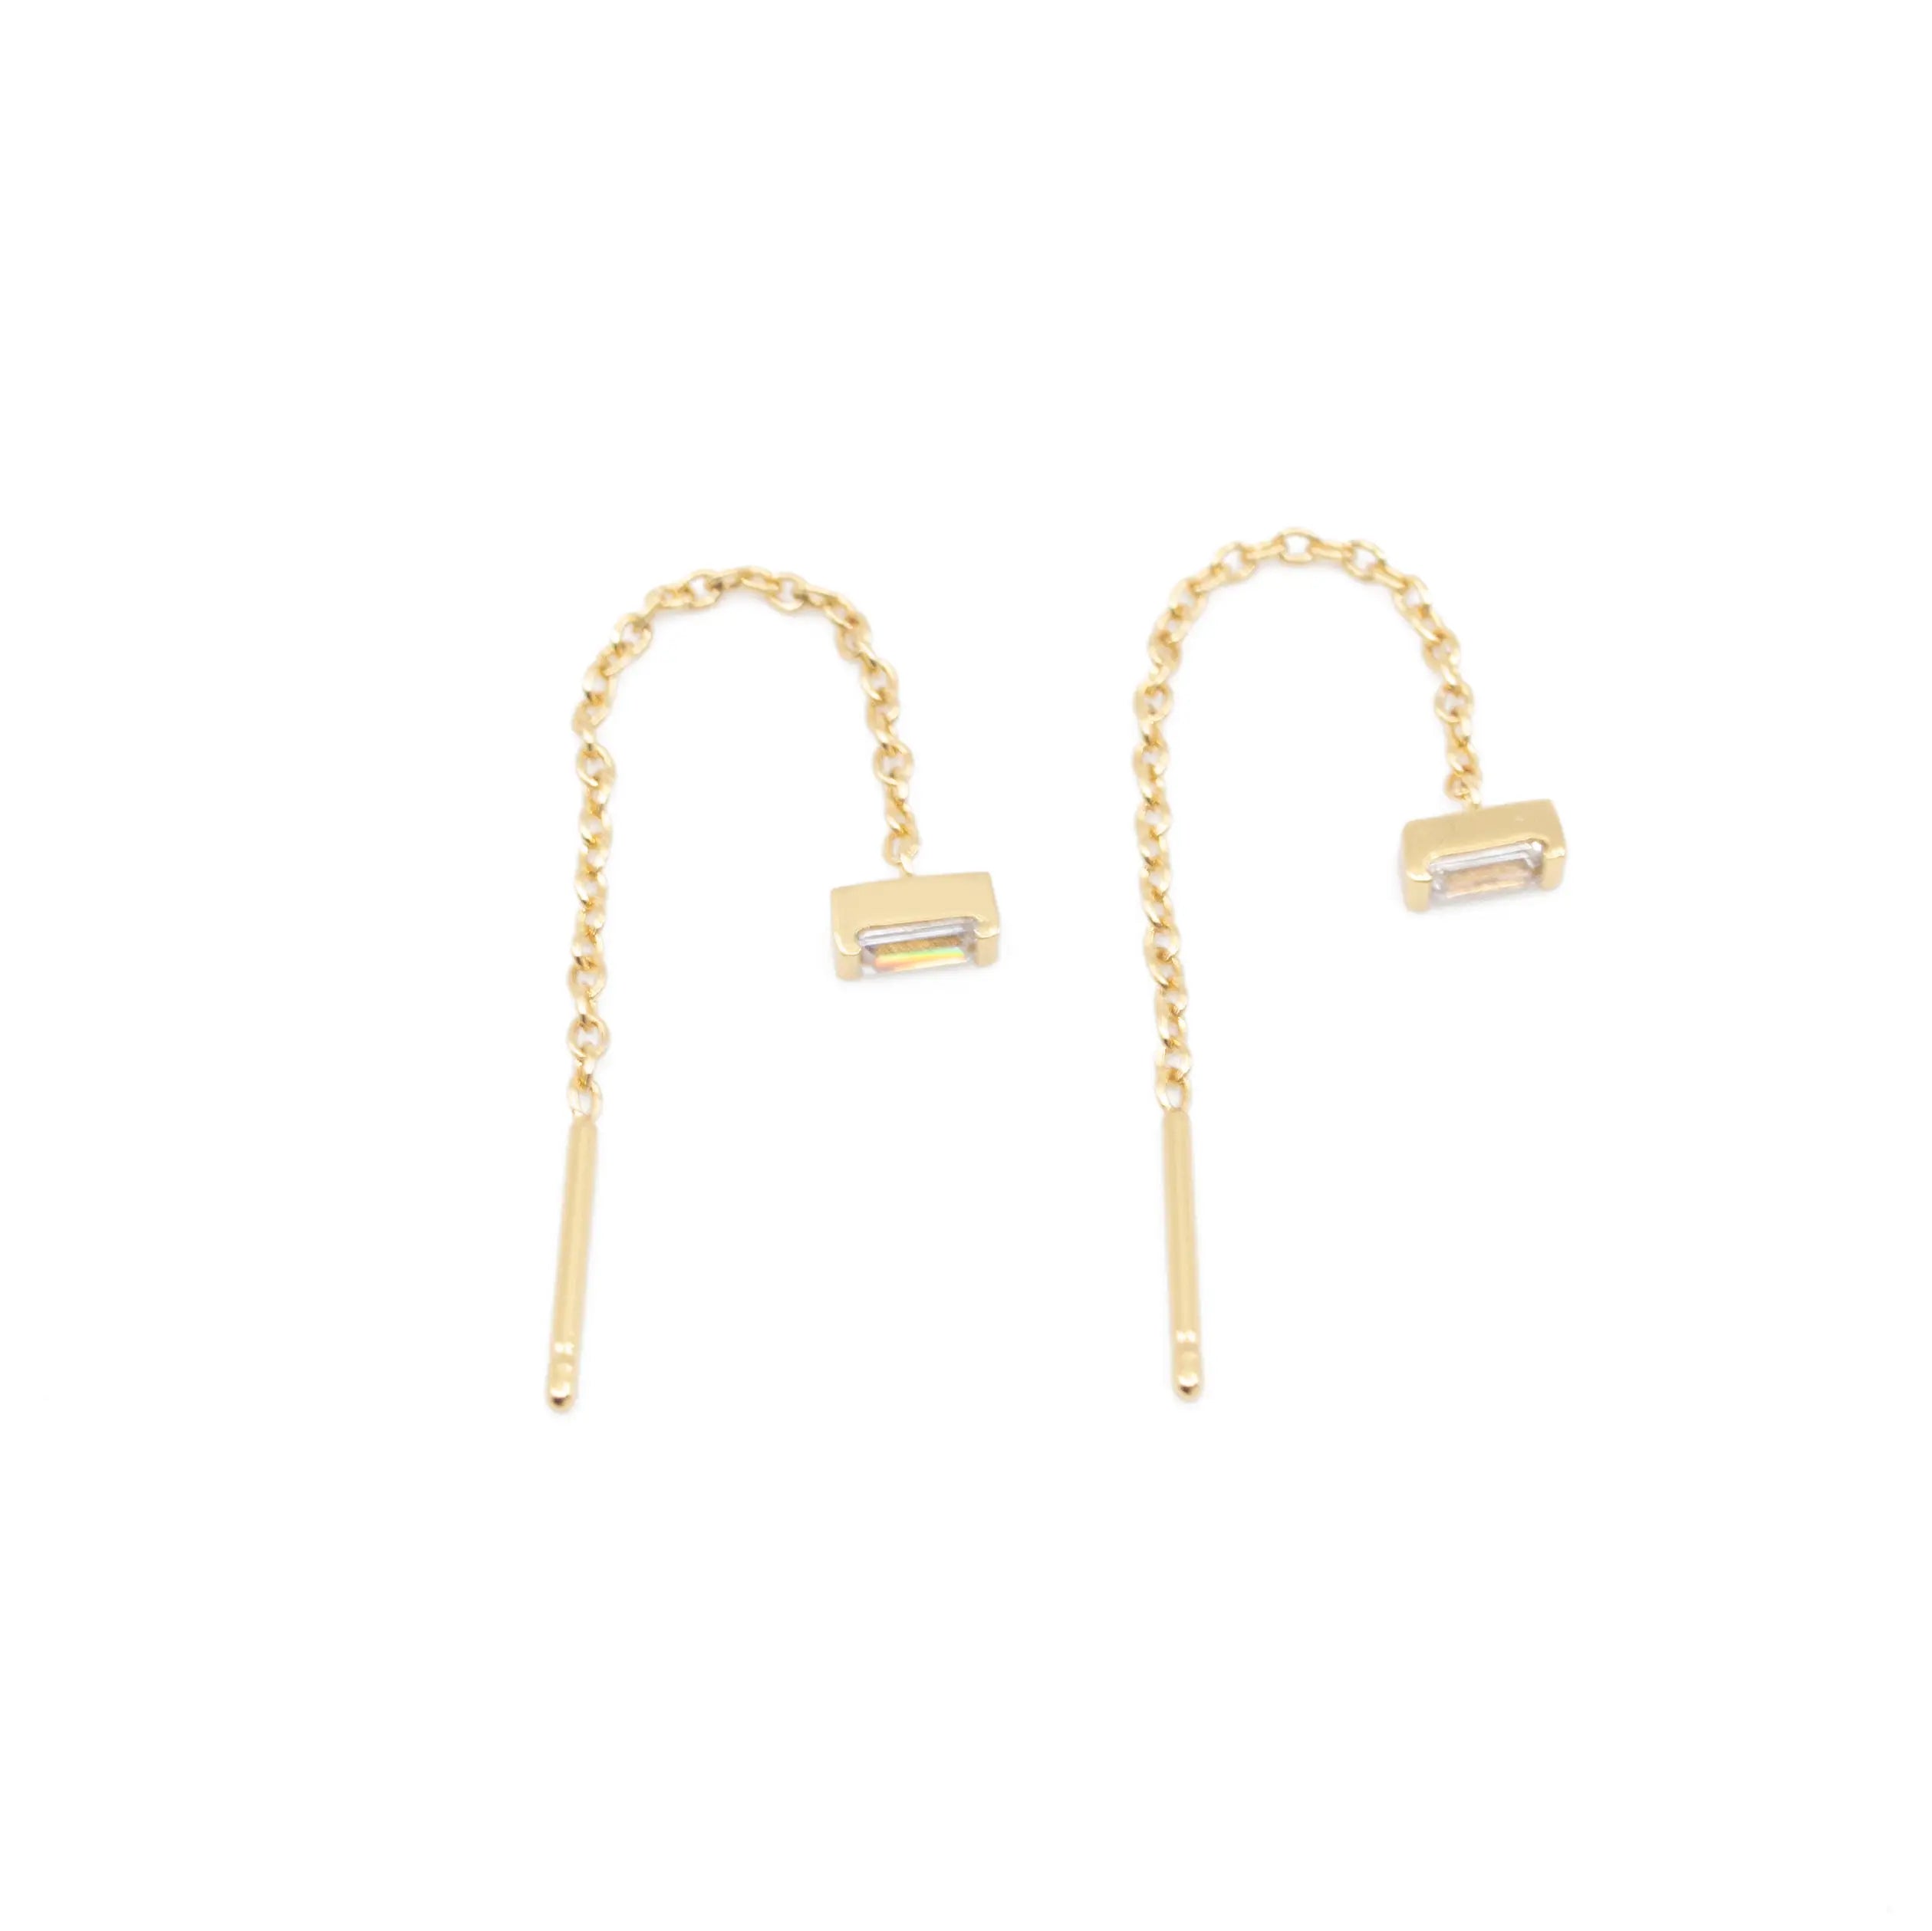 clear CZ diamond baguette threader earrings in gold by the land of salt